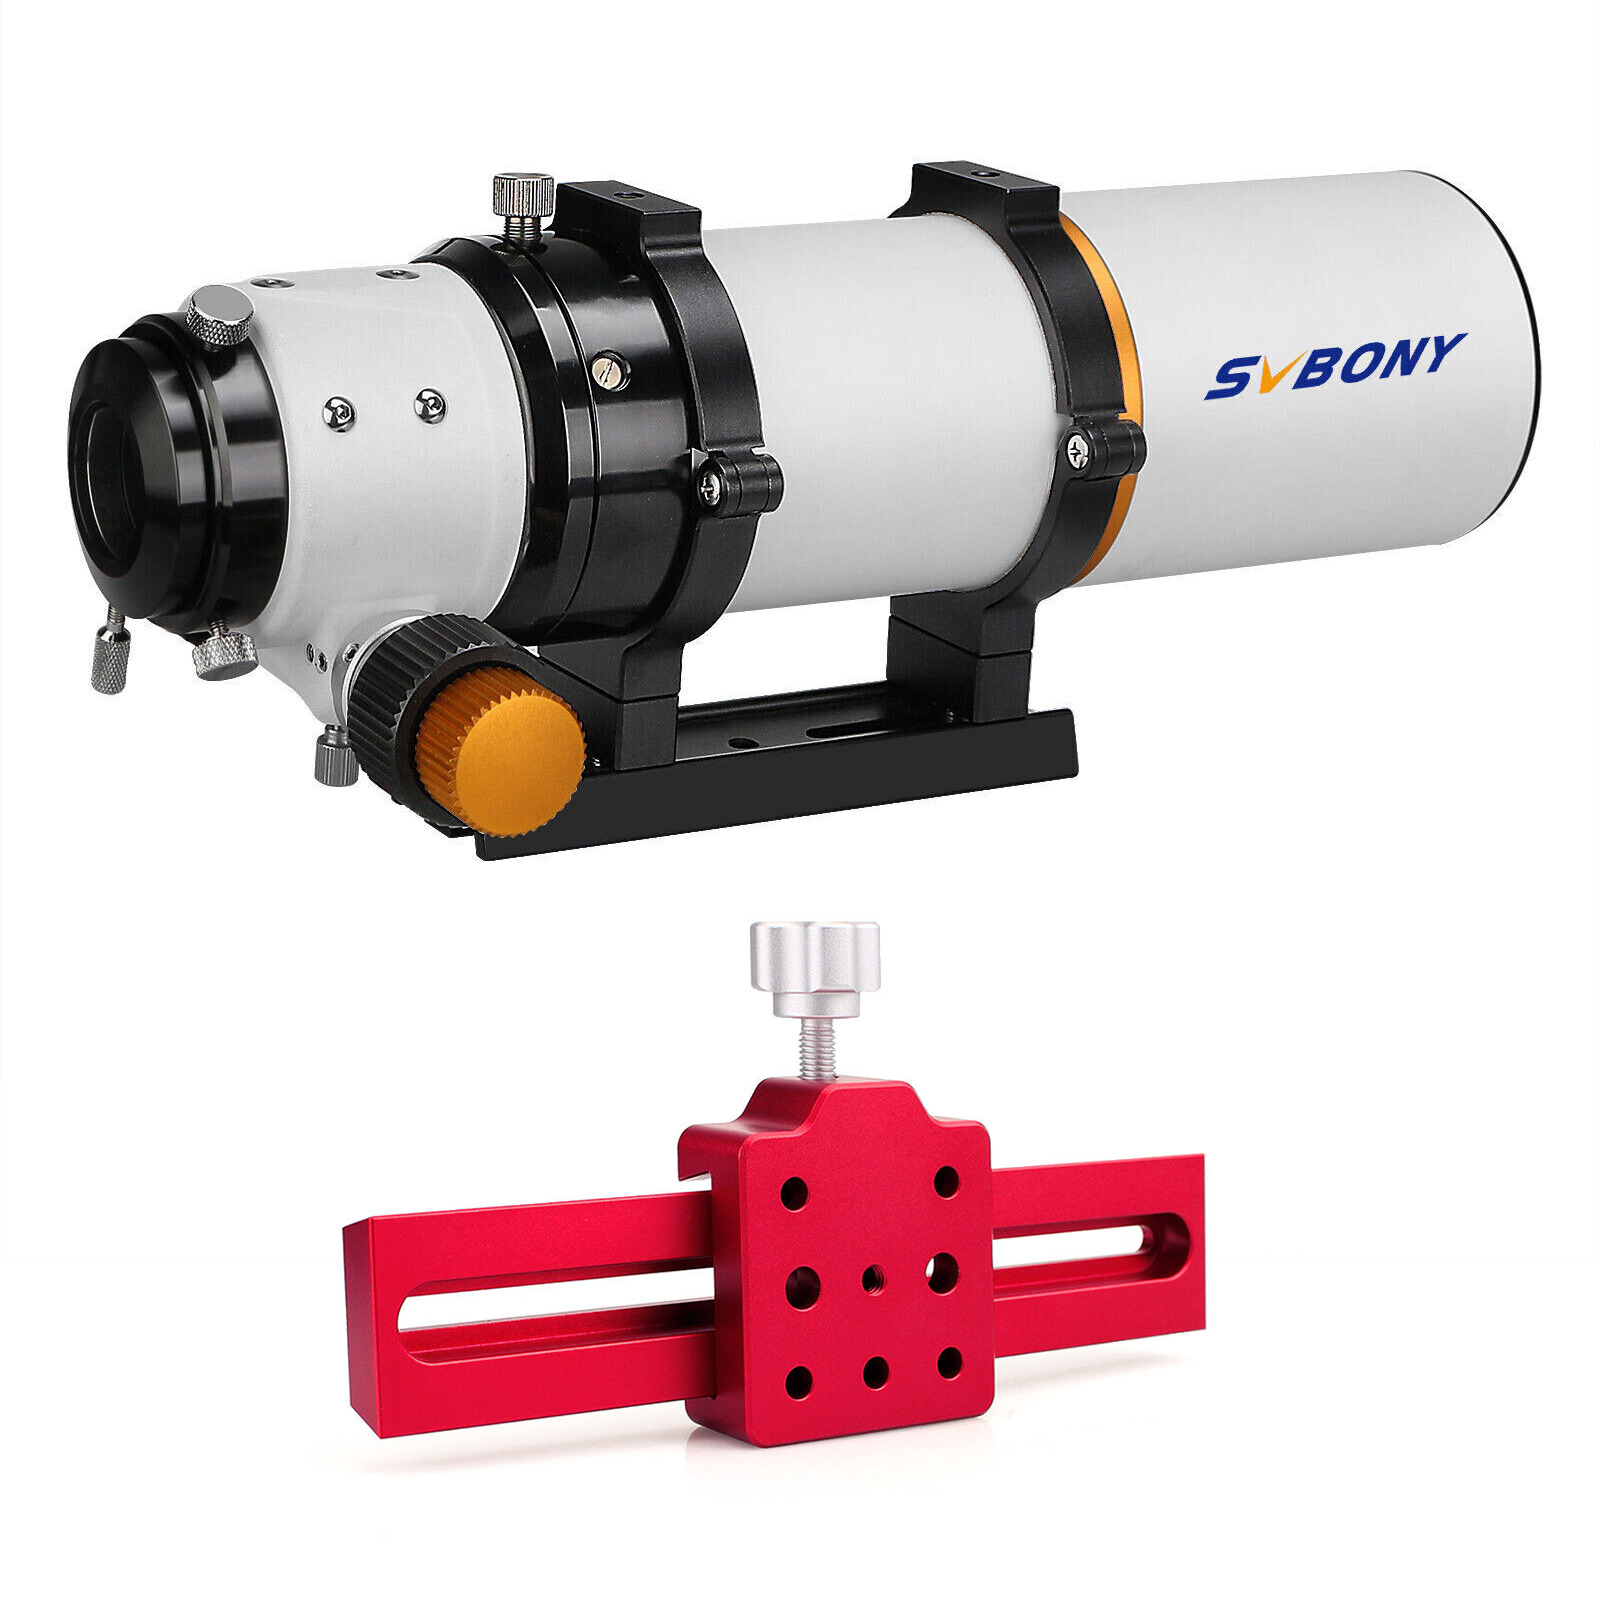 SVBONY SV503 70ED Telescope F6 Refractor OTA with Red Dovetail Clamp System